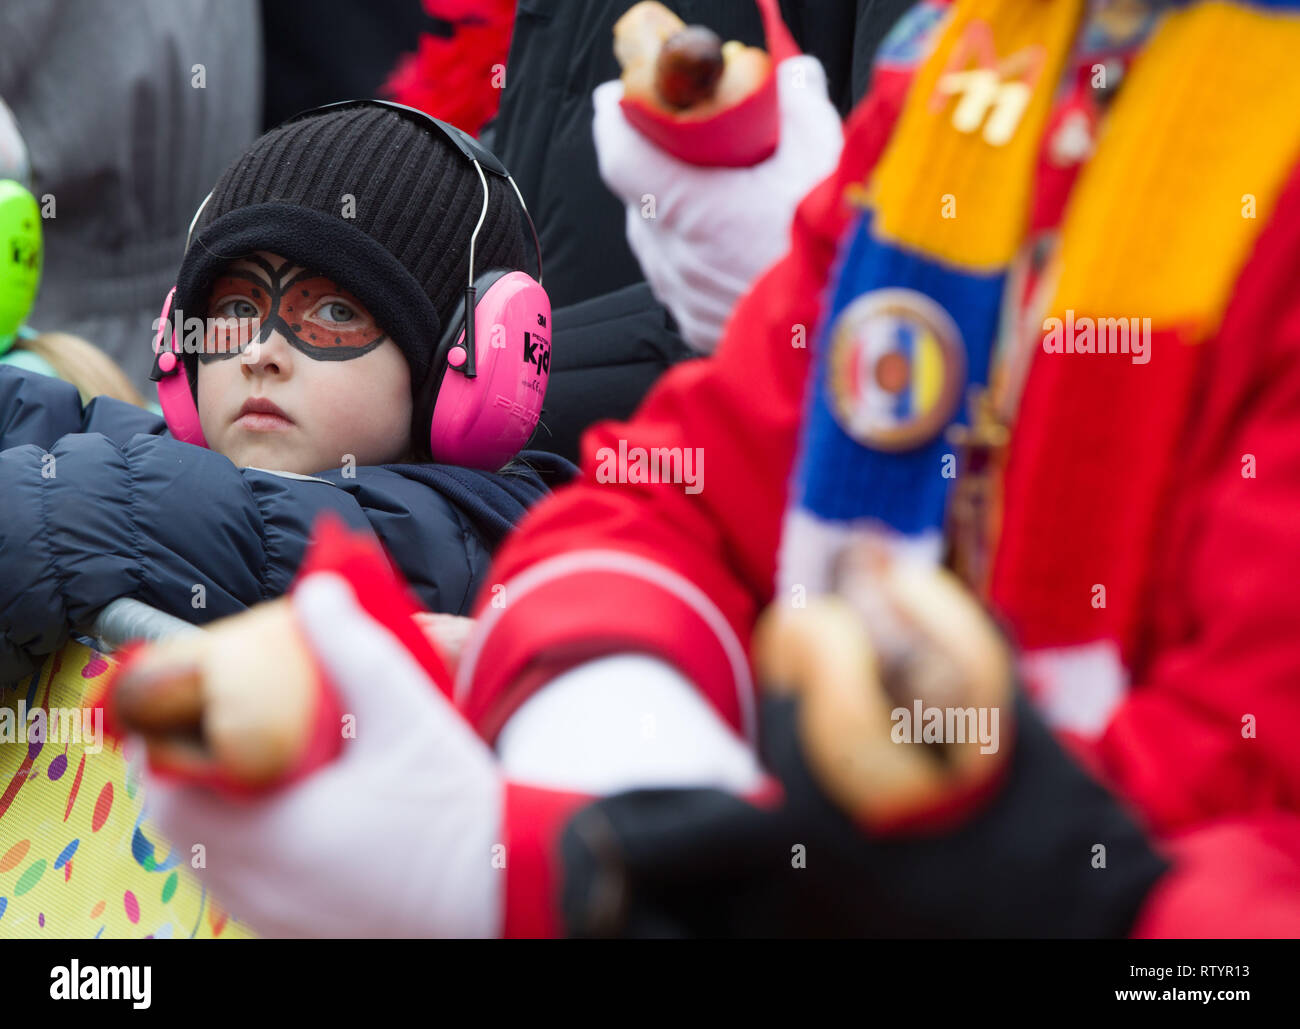 03 March 2019, Hessen, Frankfurt/Main: A little boy with a face painting and hearing protection stands on the grandstand during the carnival procession on the Römerberg. According to the Grand Council of Frankfurt Carnival Associations, about 300,000 to 400,000 spectators will line the train. The plan includes 92 cars and more than 3100 active people. Photo: Frank Rumpenhorst/dpa Stock Photo